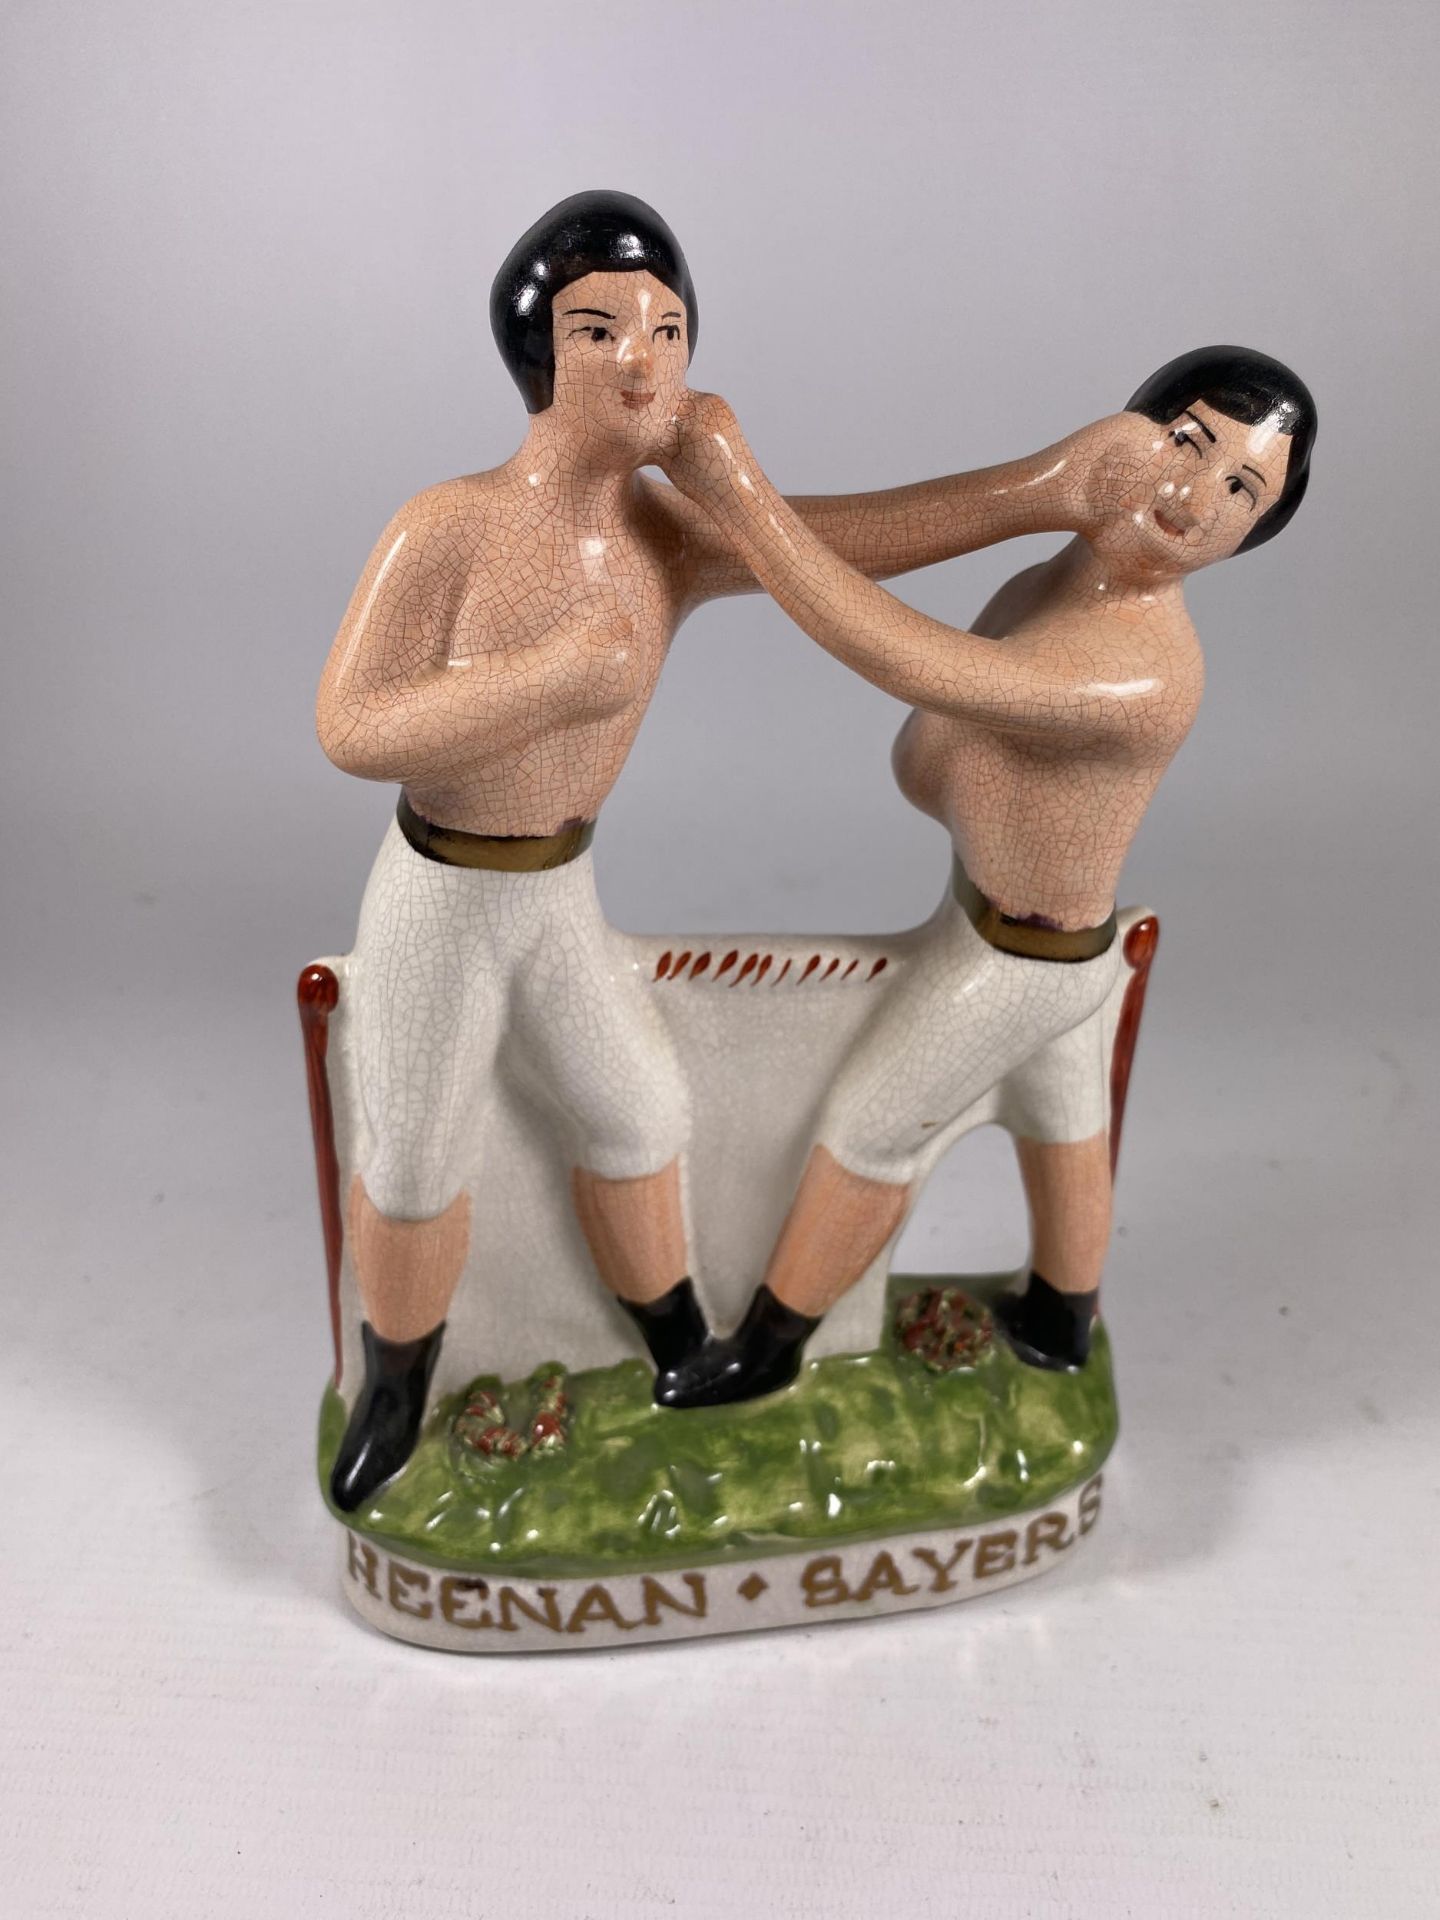 A STAFFORDSHIRE HEENAN & SAYERS POTTERY MODEL OF TWO FIGHTERS